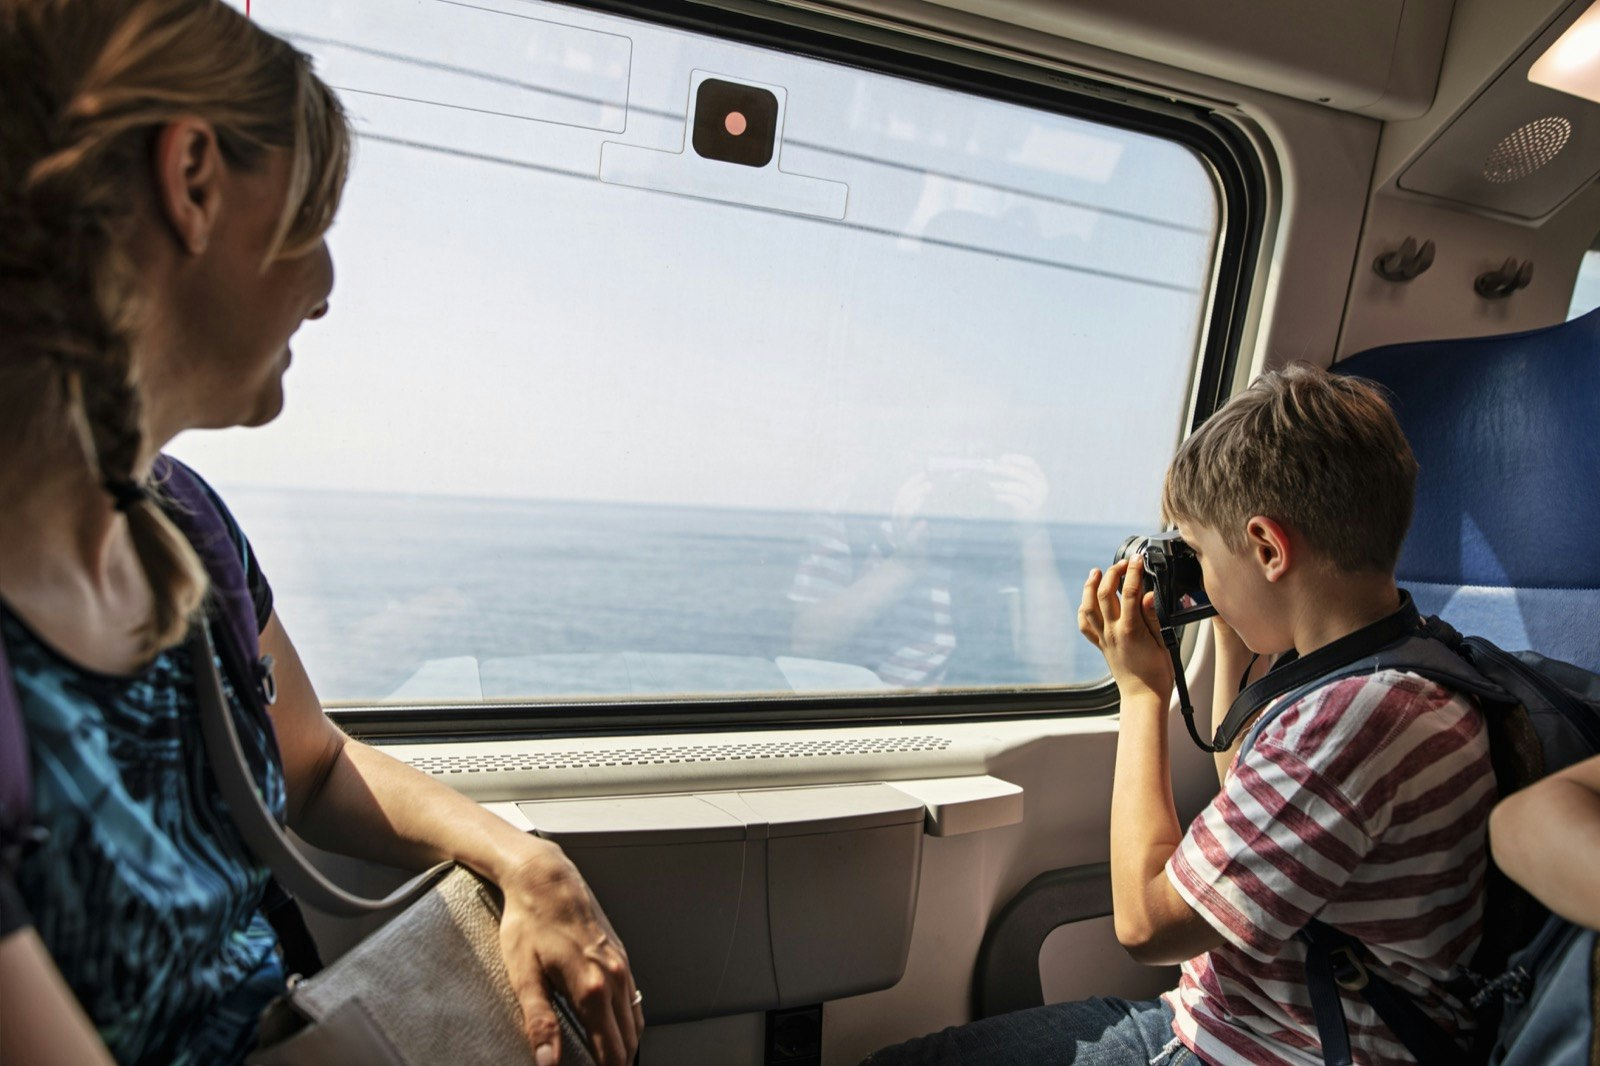 a mother and her son ride a train, the boy takes a photo out of the window while the mother smiles, they are in Italy